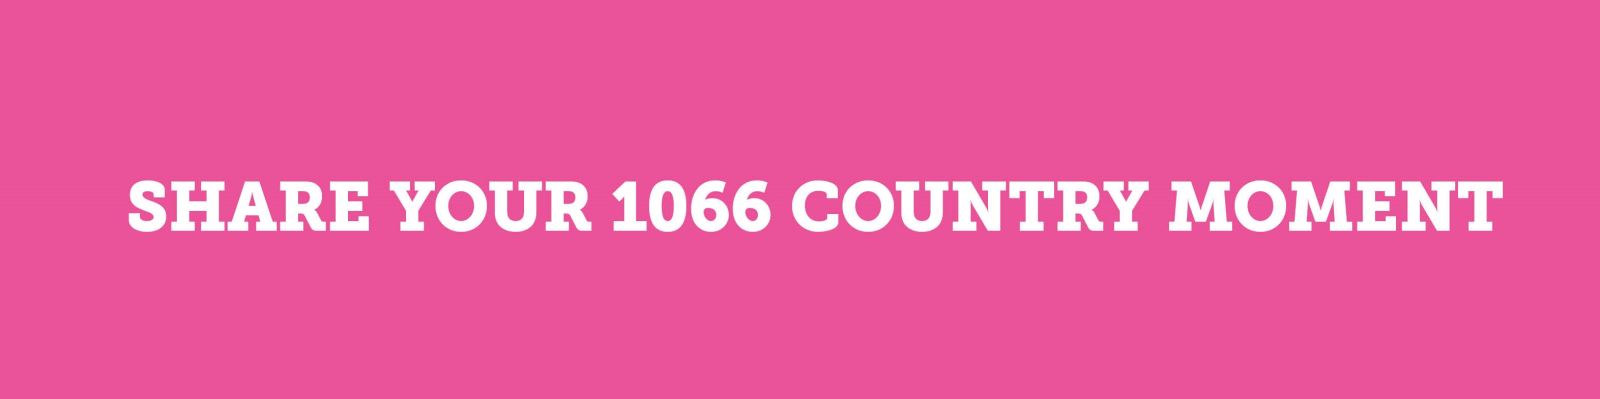 button to share your 1066 competition